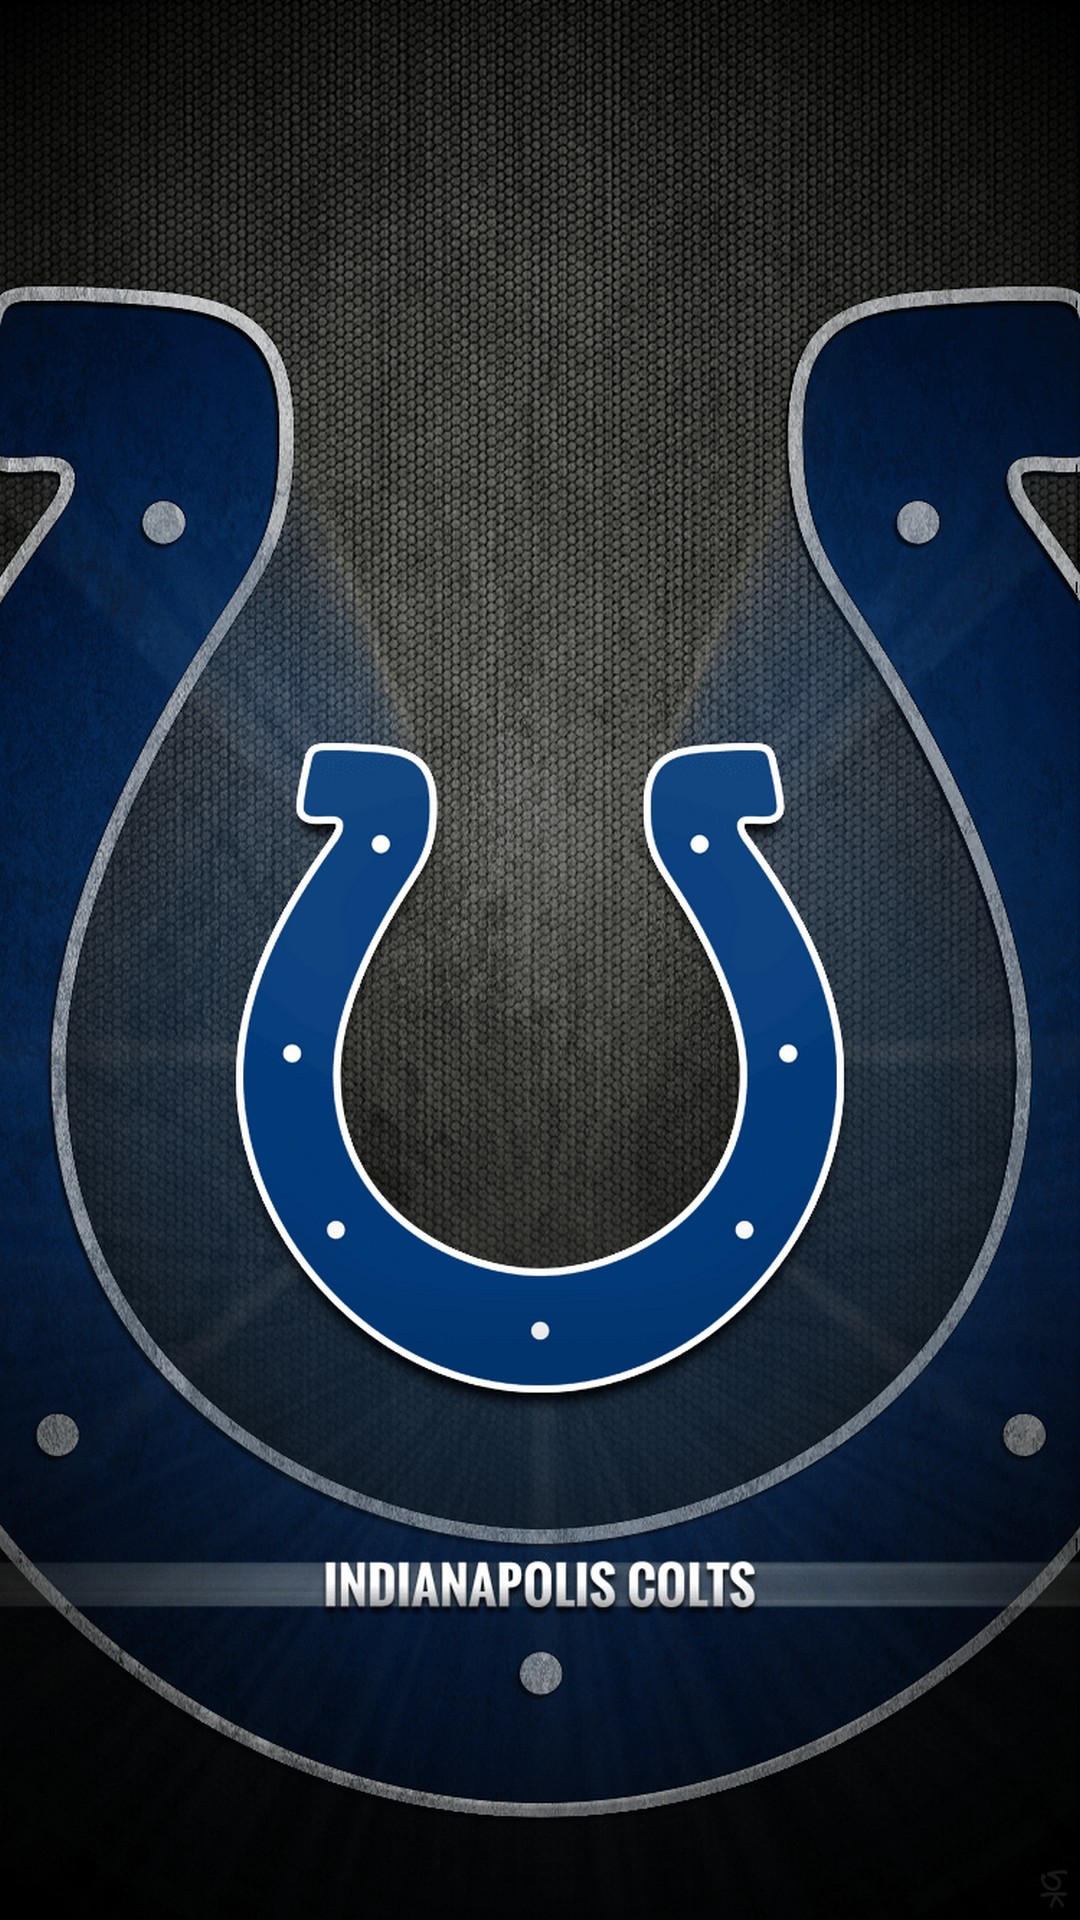 Indianapolis Colts NFL iPhone Wallpaper New With high-resolution 1080X1920 pixel. Donwload and set as wallpaper for your iPhone X, iPhone XS home screen backgrounds, XS Max, XR, iPhone8 lock screen wallpaper, iPhone 7, 6, SE, and other mobile devices